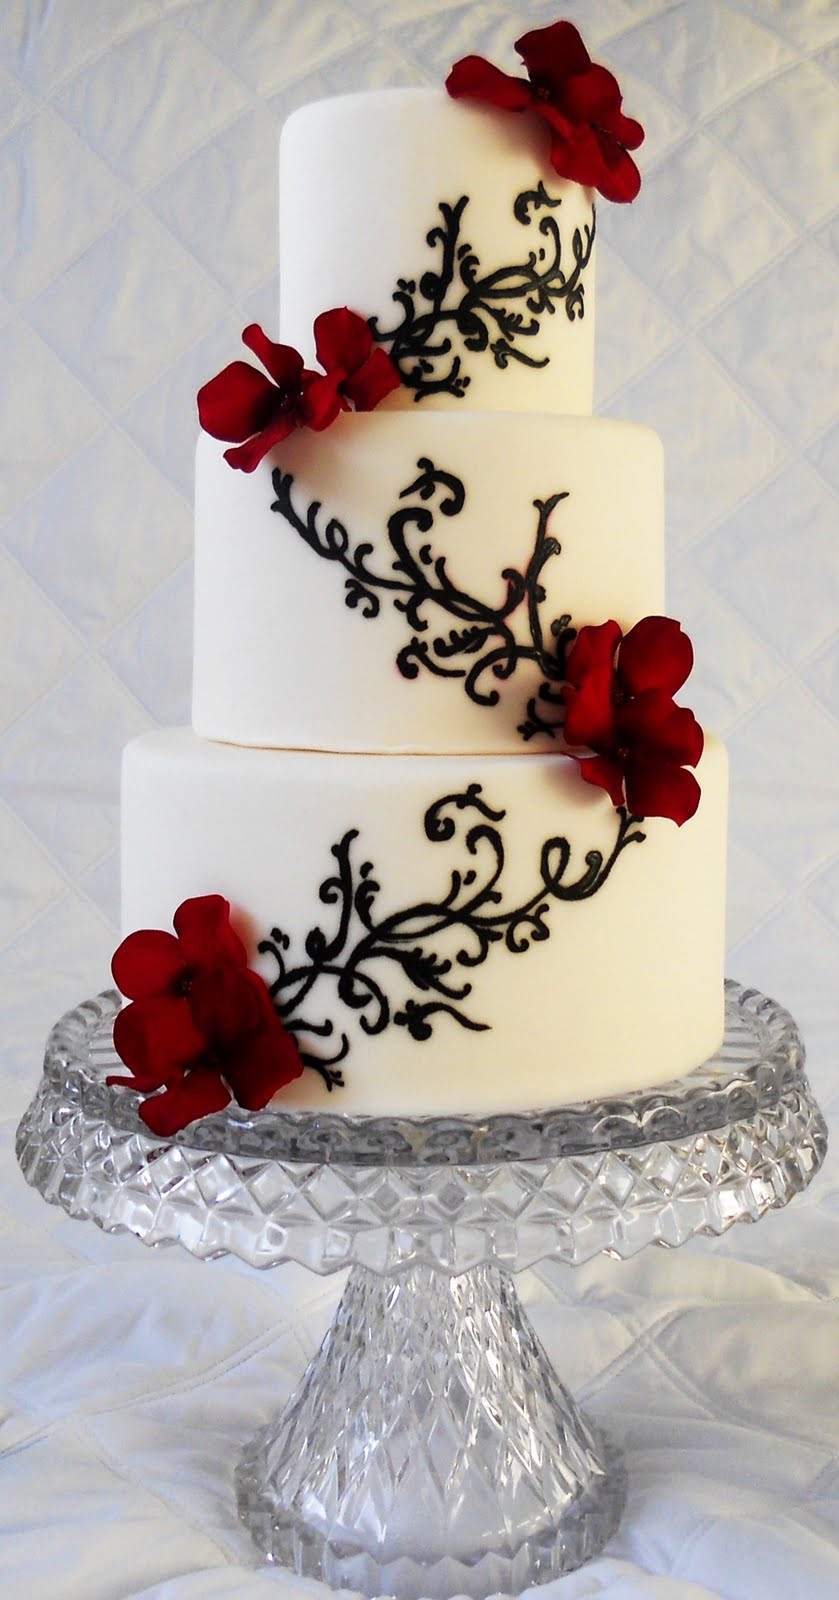 Black And White Wedding Cake
 Memorable Wedding Find the Best Red Black and White